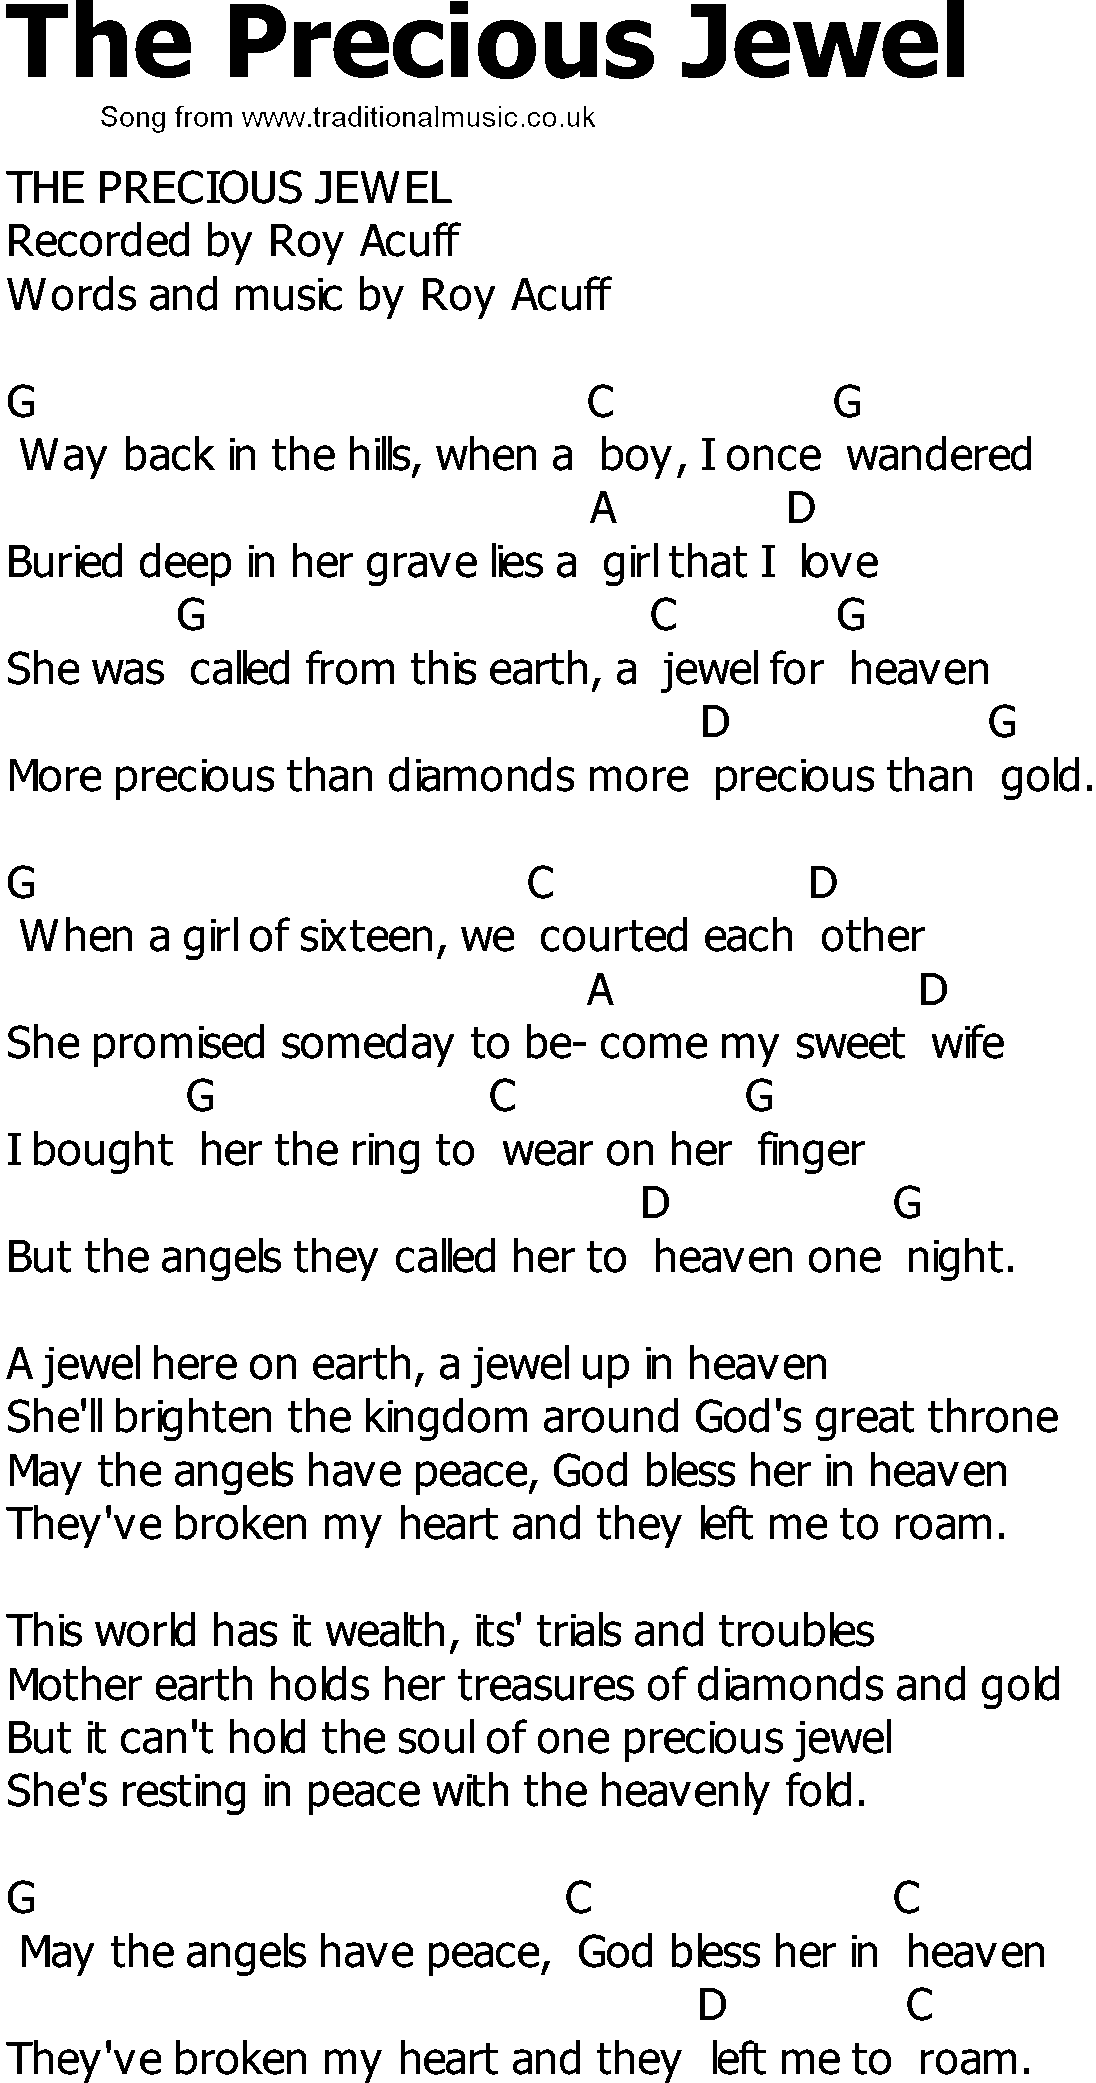 Old Country song lyrics with chords - The Precious Jewel